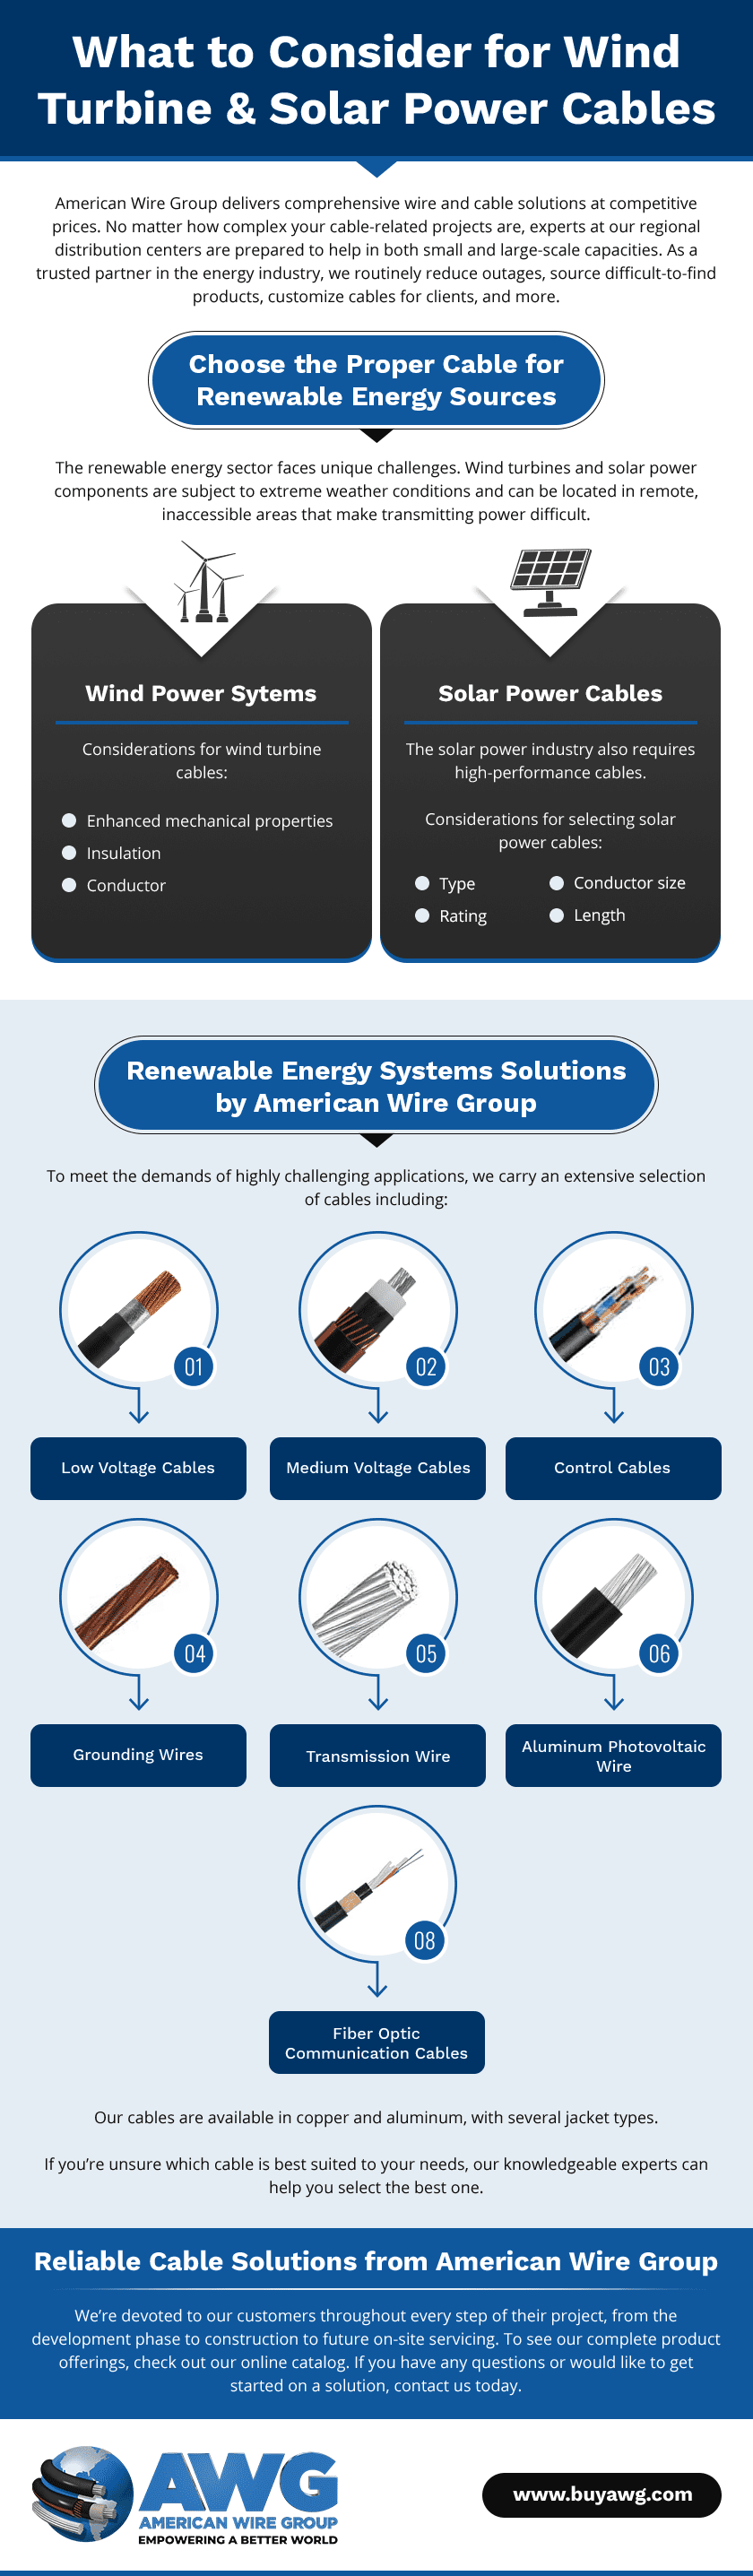 What to Consider for Wind Turbine & Solar Power Cables